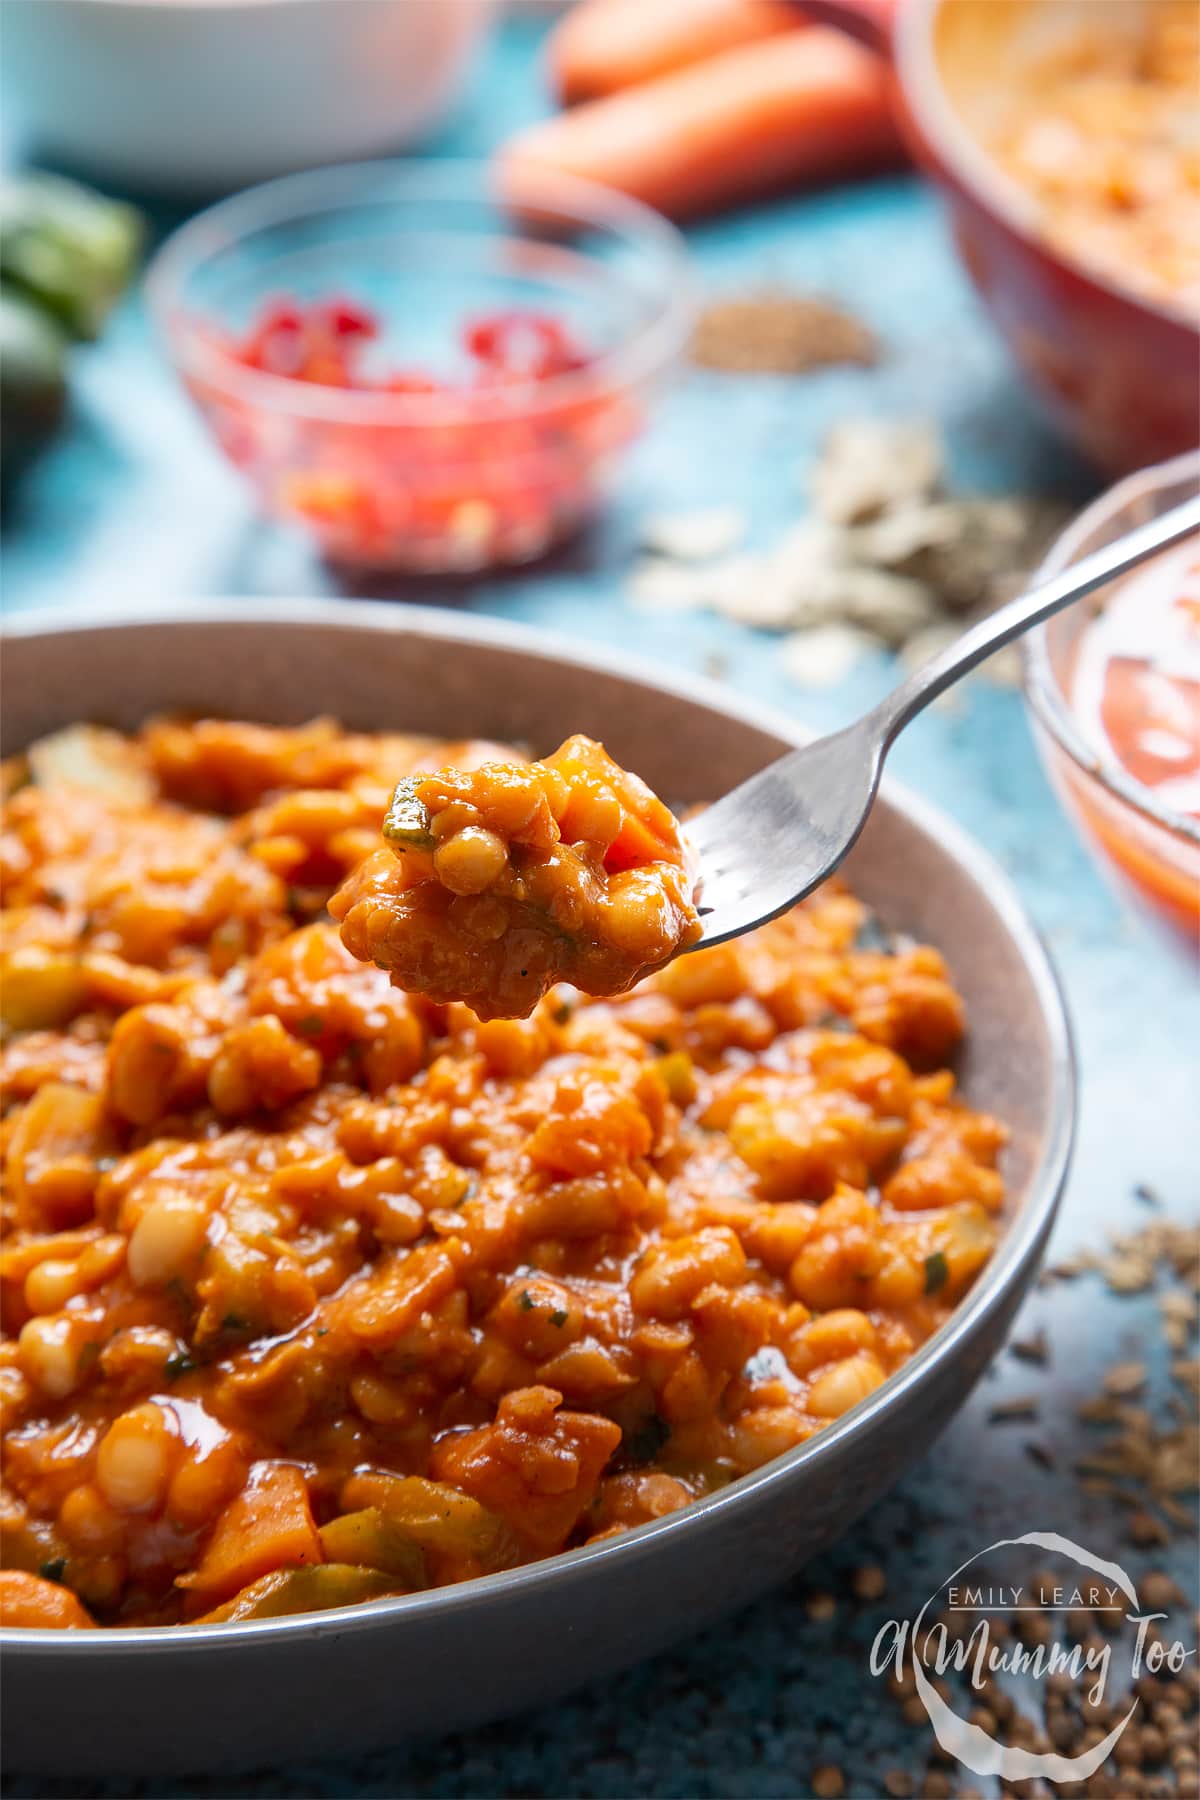 Baked bean curry served in a grey bowl. A fork dips into the curry.